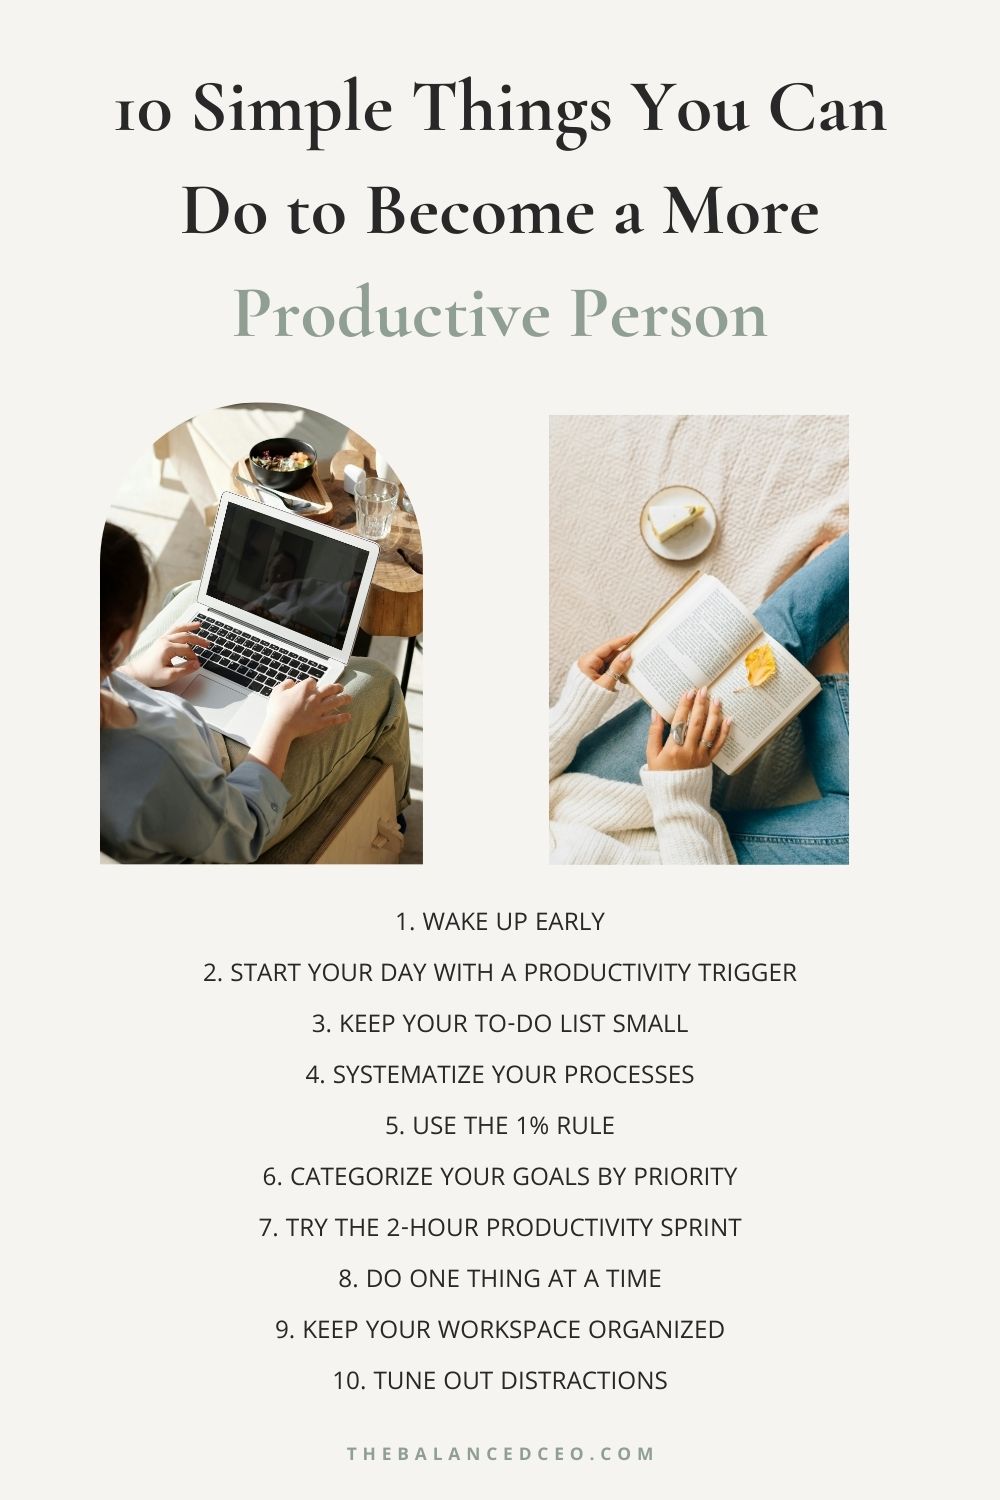 10 Simple Things You Can Do to Become a More Productive Person